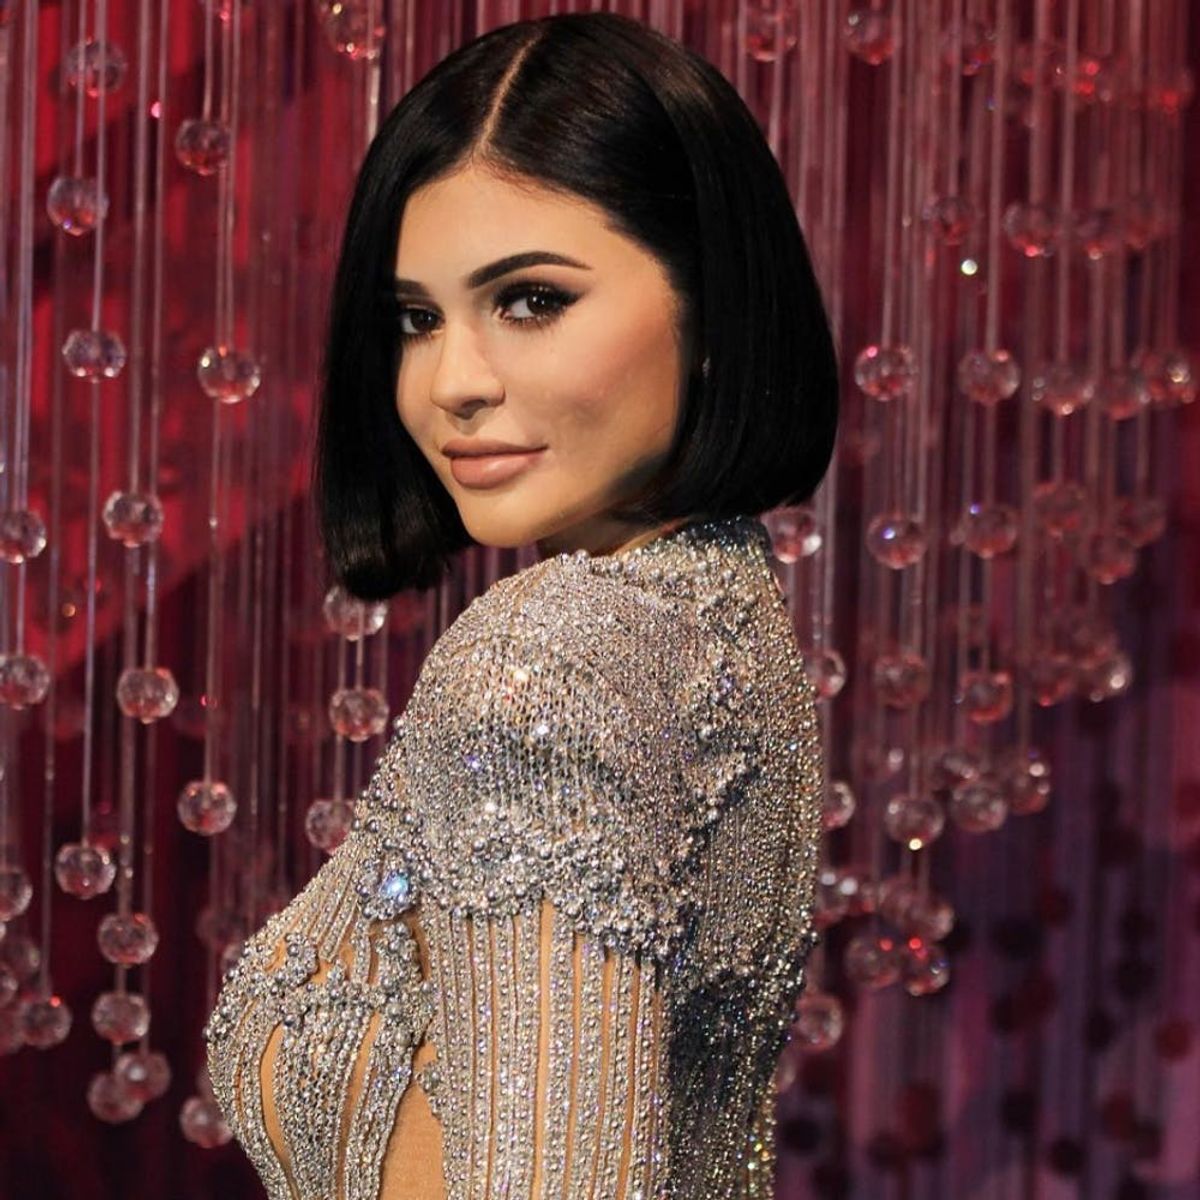 This Is What Happened to Kylie Jenner’s Met Gala Dress